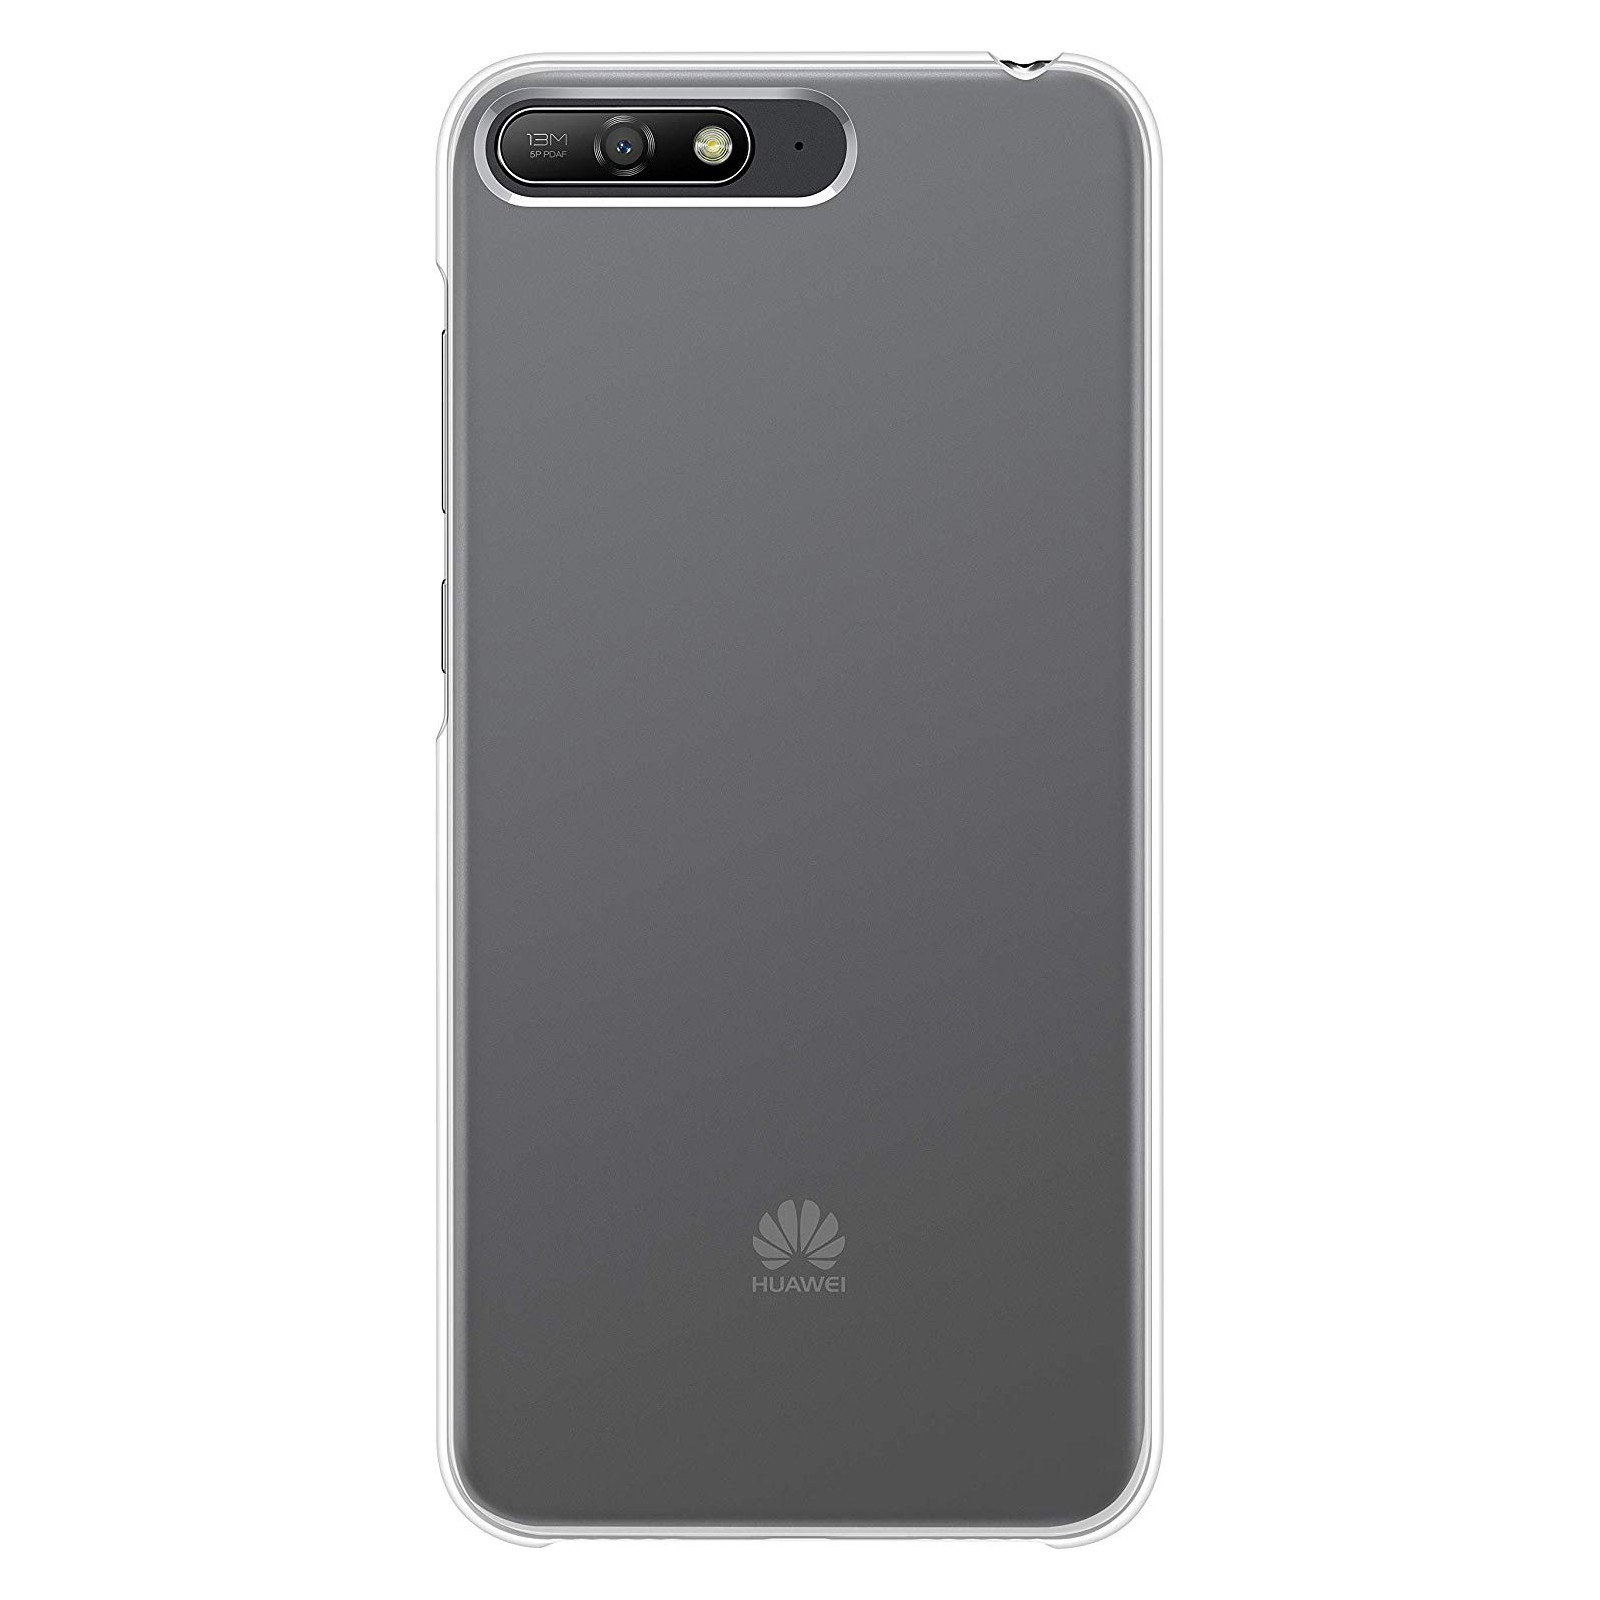 HUAWEI 51992440 Y6 2018 PC Y6 Huawei, CASE Backcover, Transparent TRANSPARENT, 2018